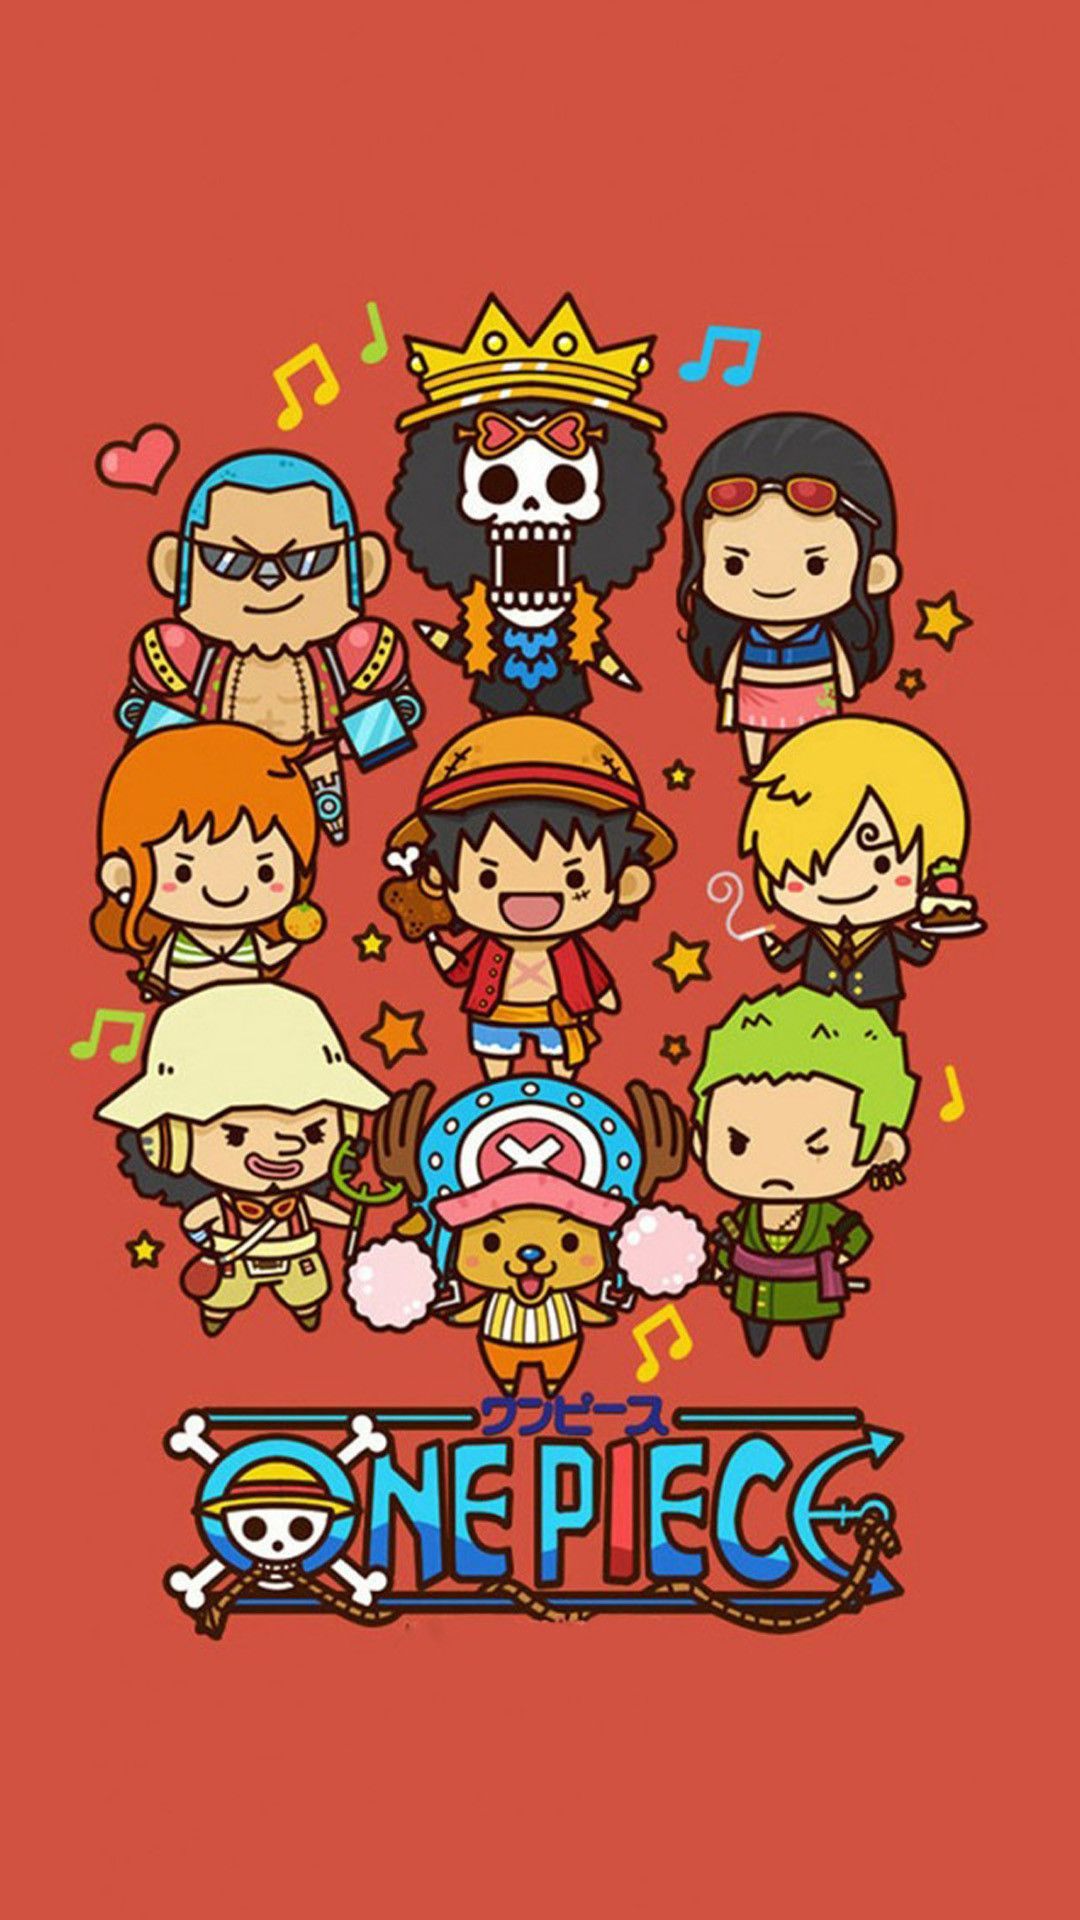 Aesthetic One Piece Wallpaper. One piece